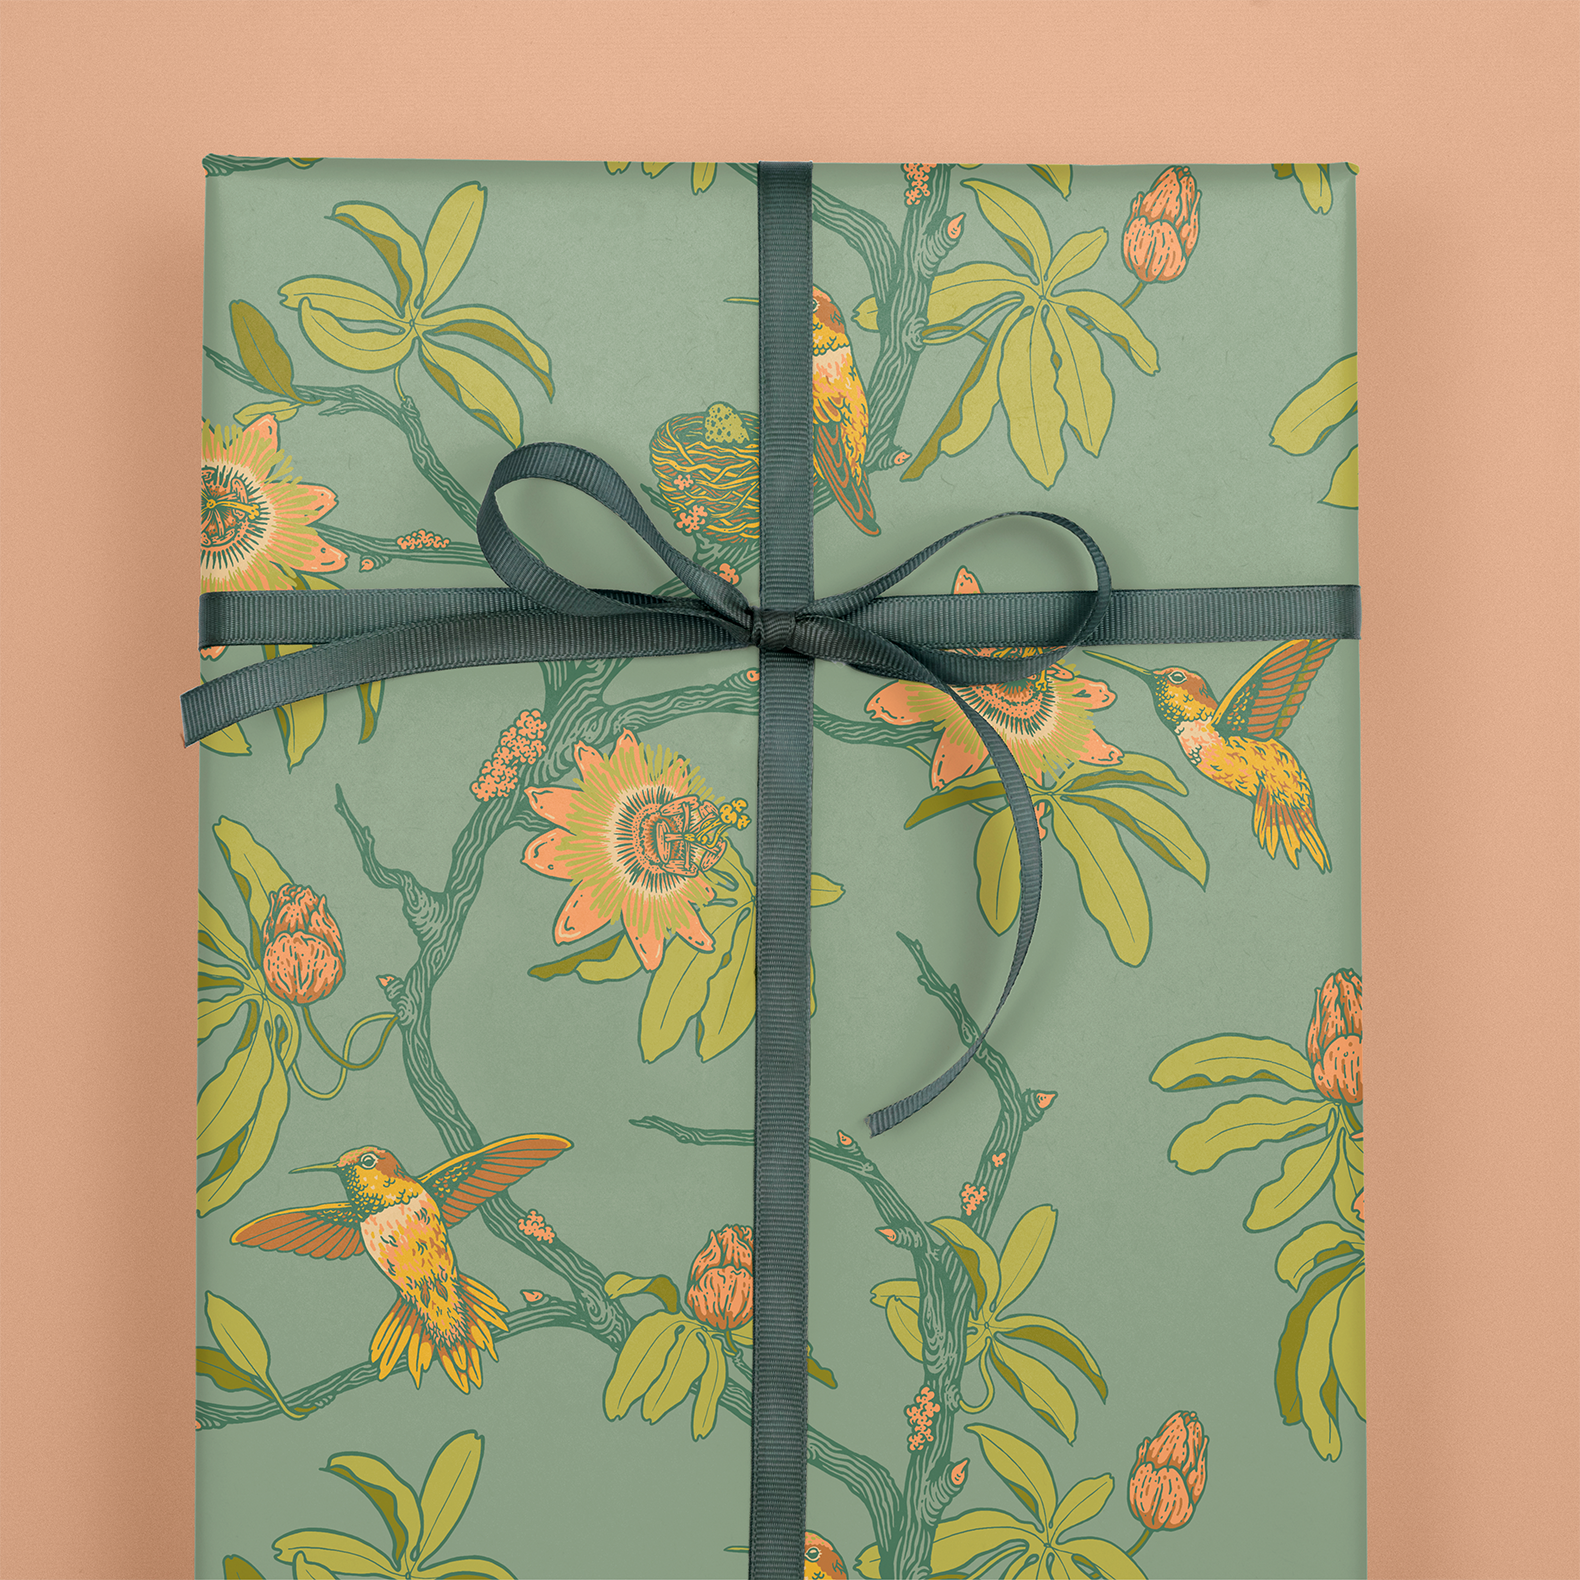 Recyclable Gift Wrap / Wrapping Paper: Hummingbirds